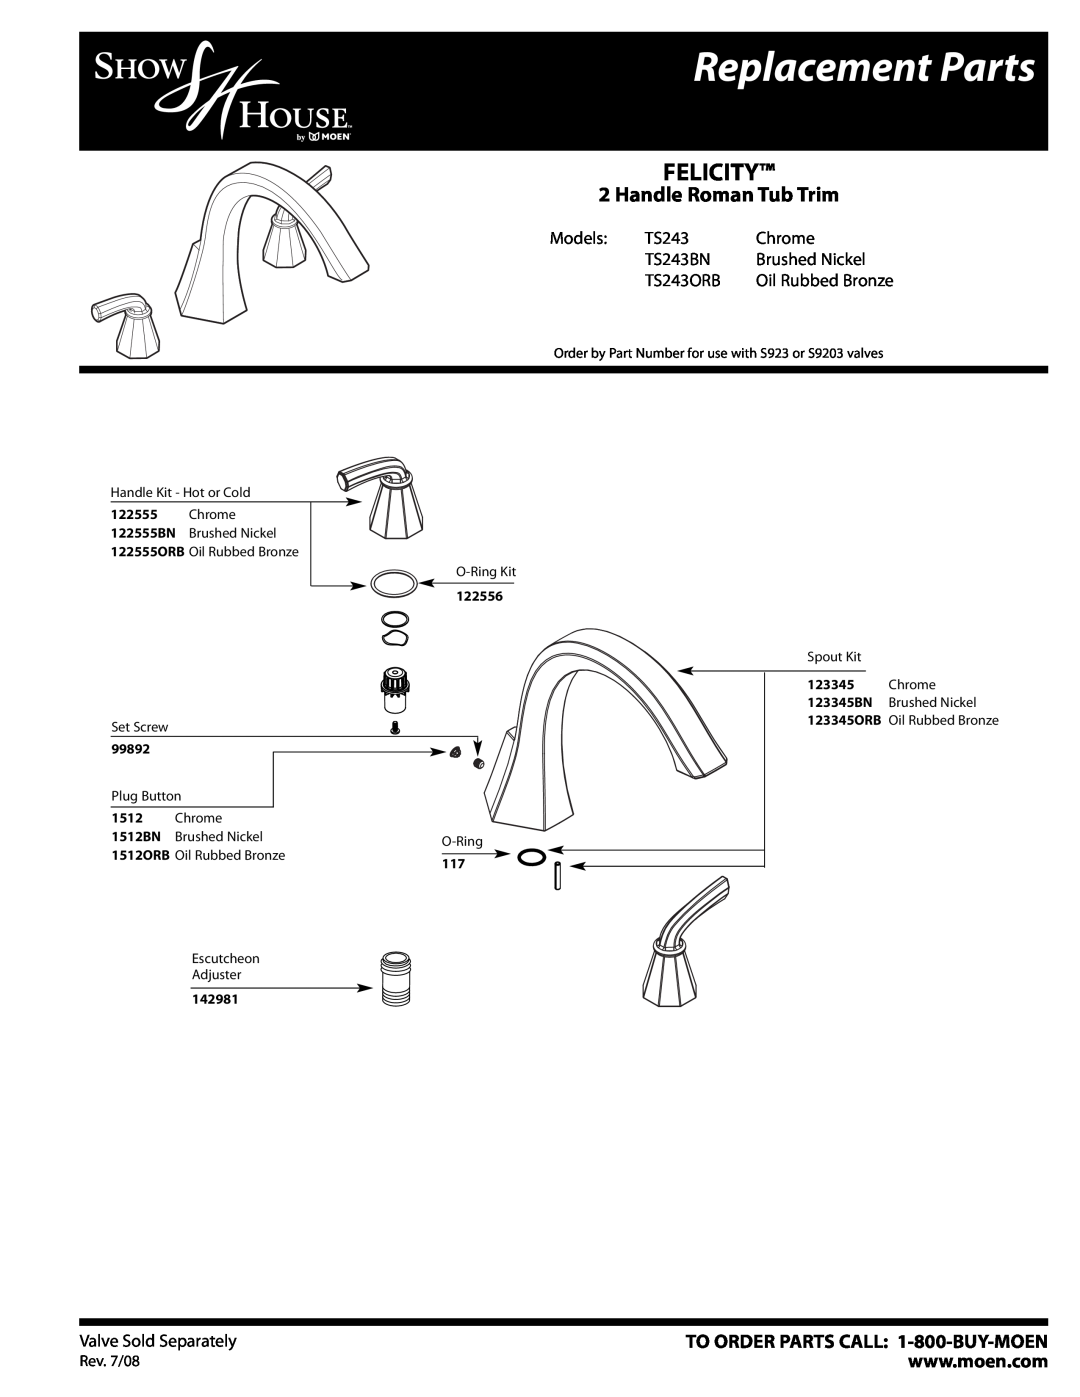 Moen manual Replacement Parts, Felicity, Handle Roman Tub Trim, Models, Chrome, TS243BN, Brushed Nickel, TS243ORB 